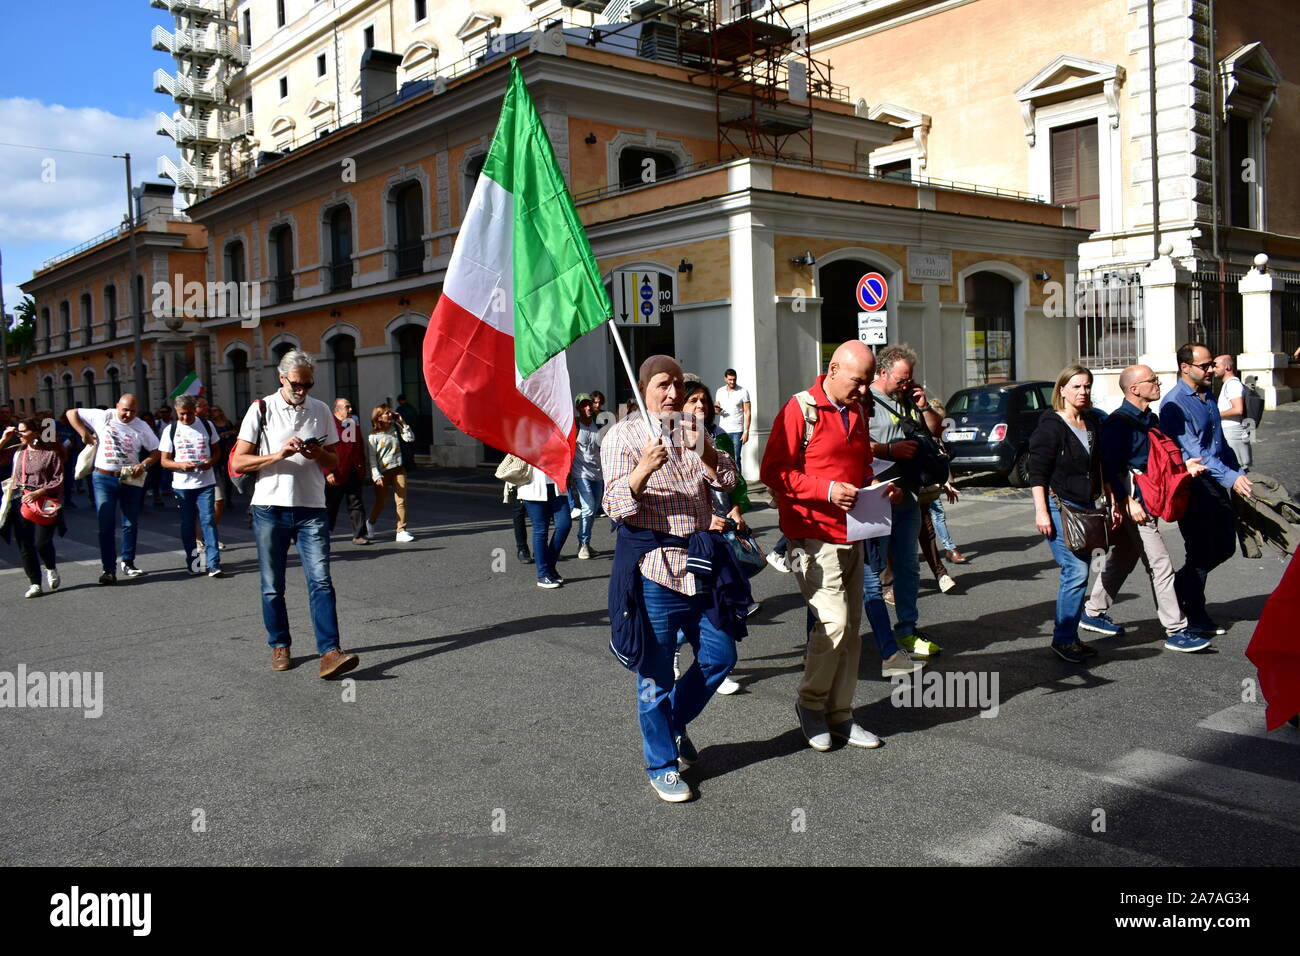 Demonstrators on the streets of Rome against the Euro and the European Union asking for Italexit and waving italian flags. Rome, Italy. Oct. 12, 2019. Stock Photo